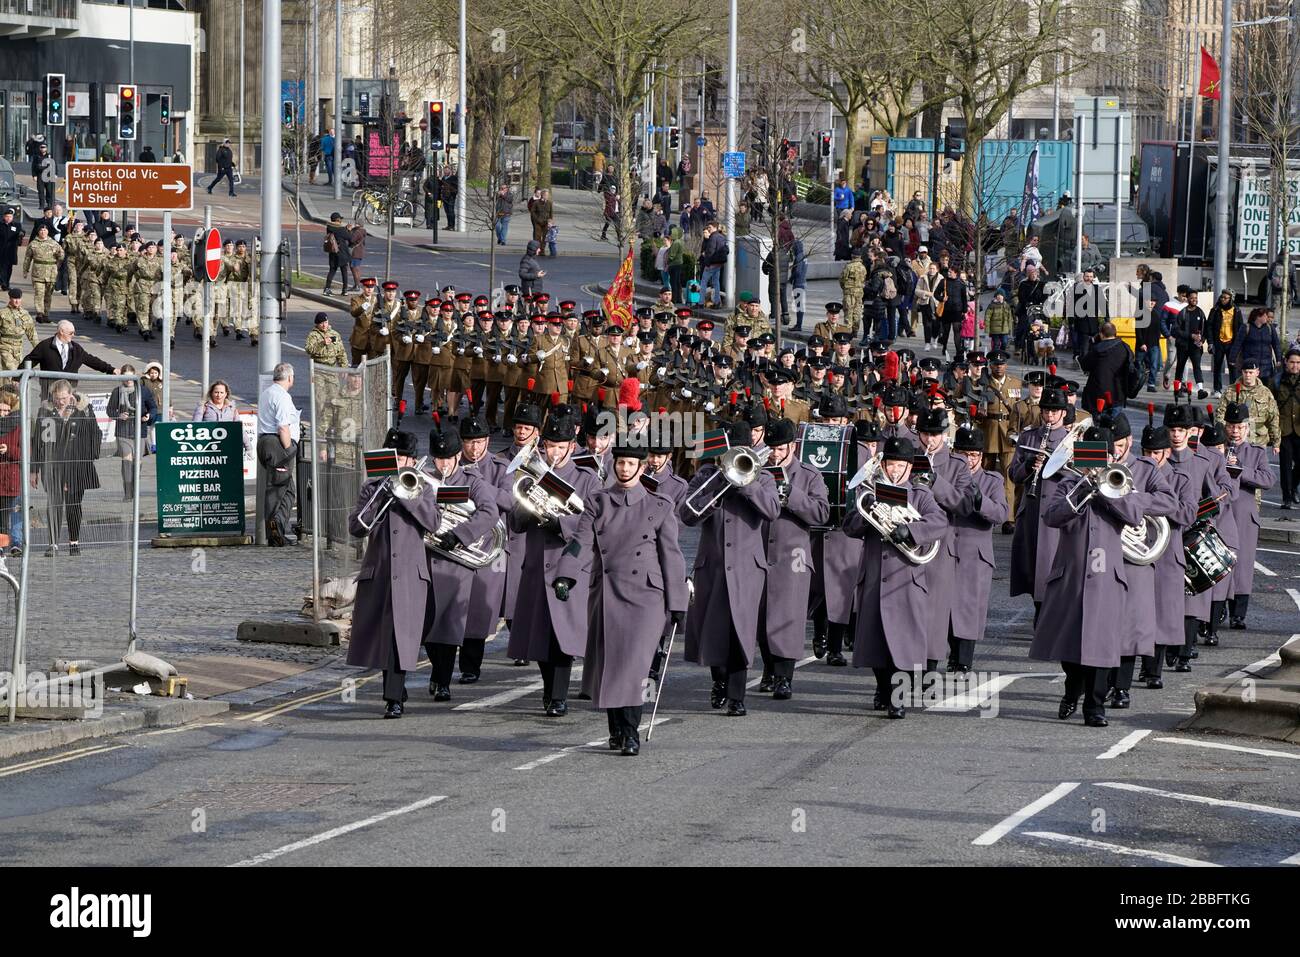 Members of 39 Signal Regiment march through the centre of Bristol during a Freedom of the City Parade on Saturday 22 February 2020. Stock Photo